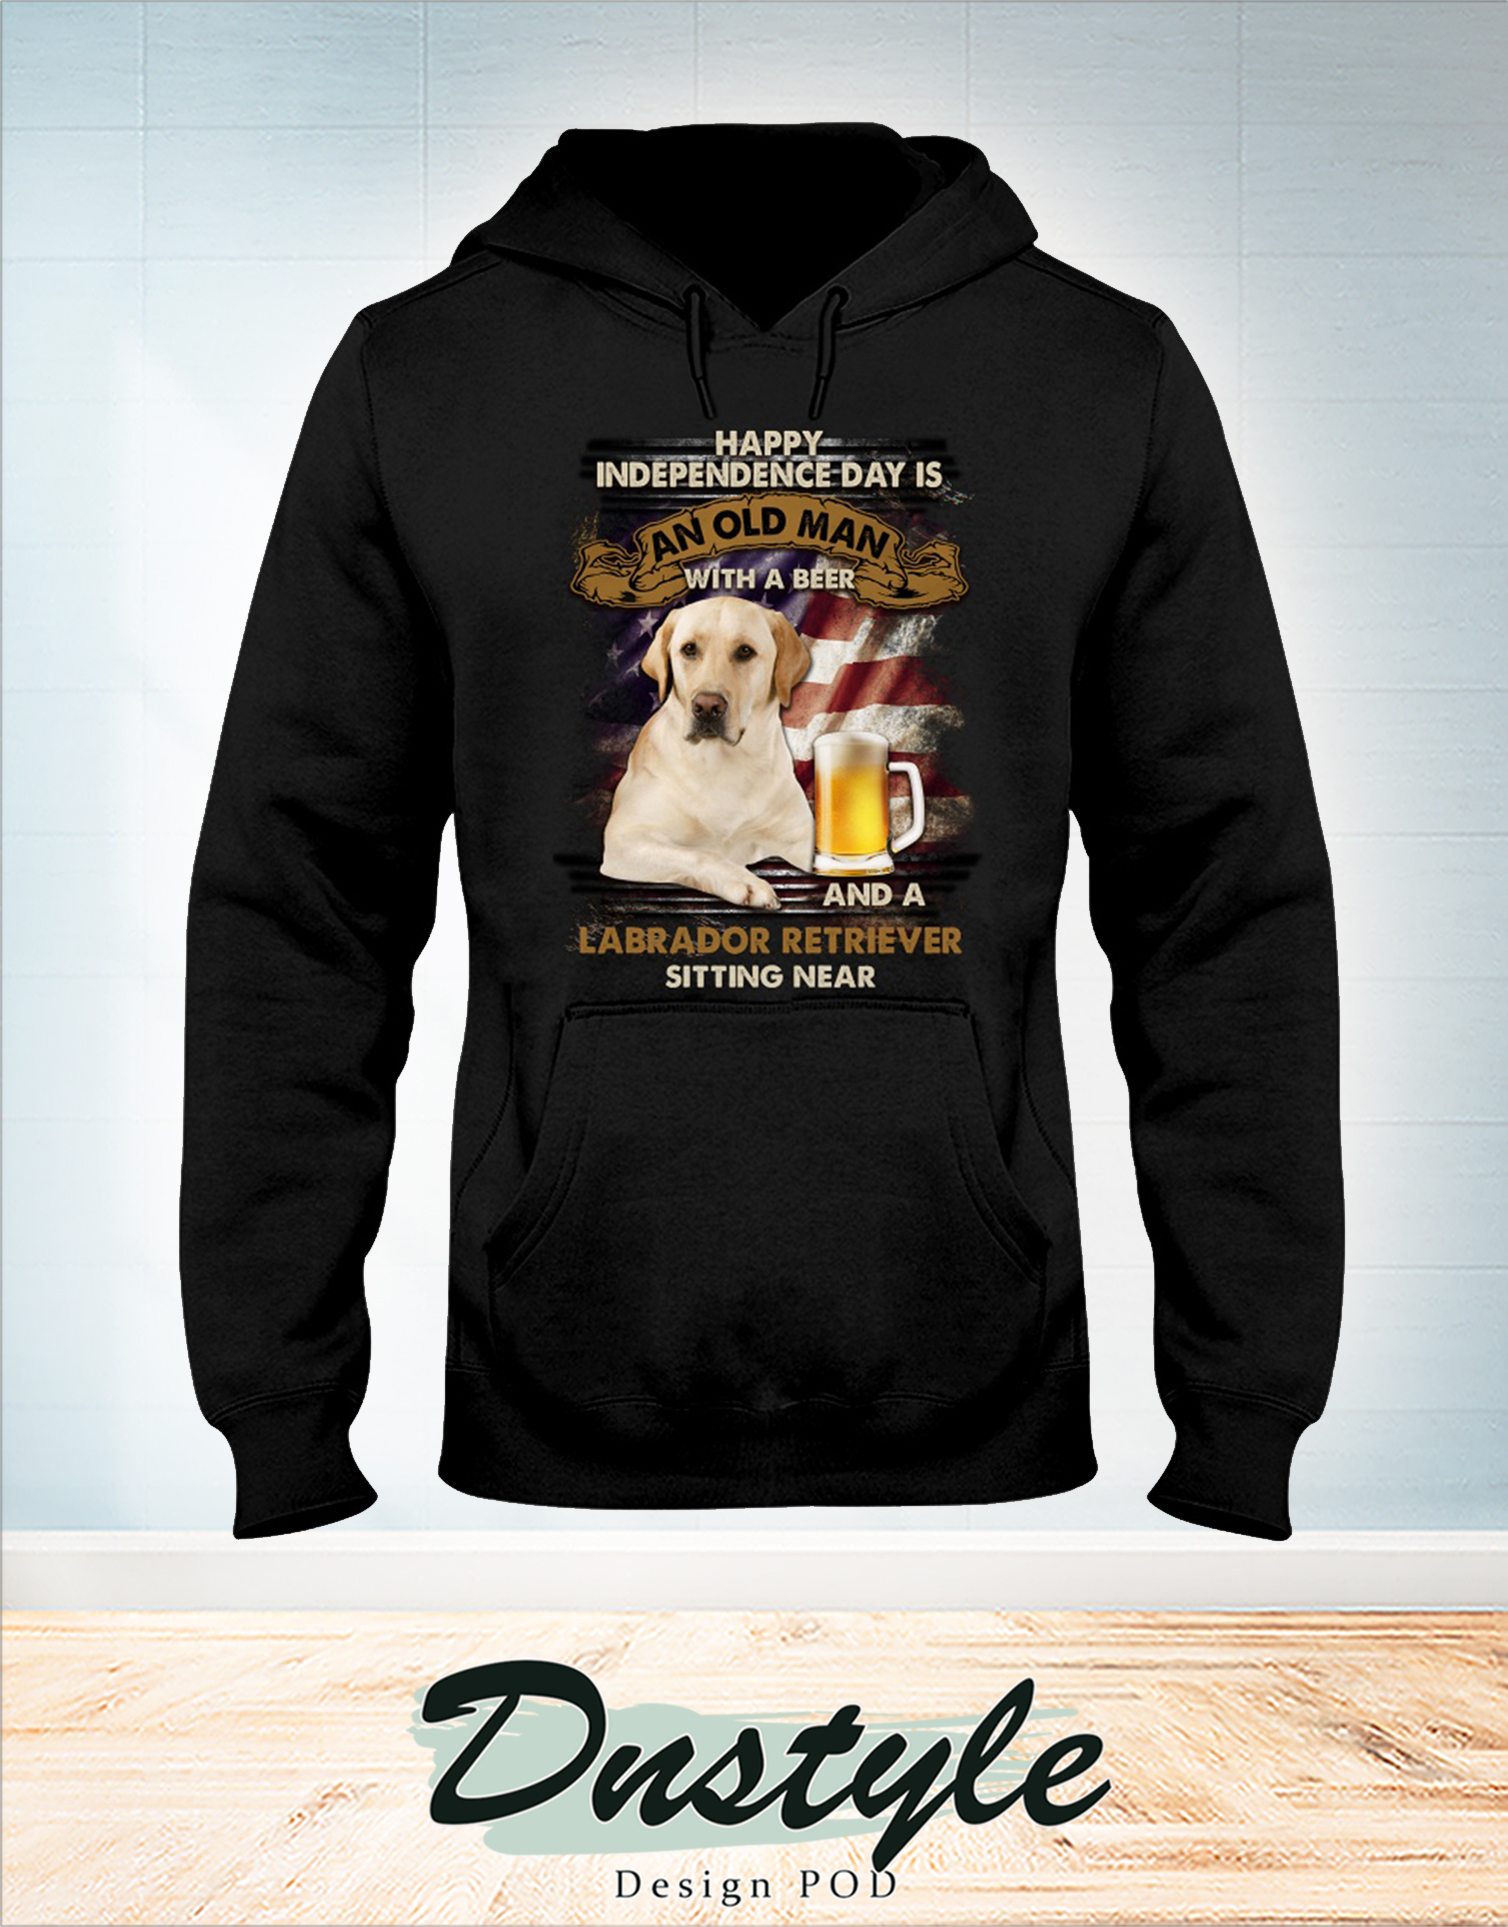 Happy independence day is an old man with a beer and a Labrador retriever sitting near hoodie